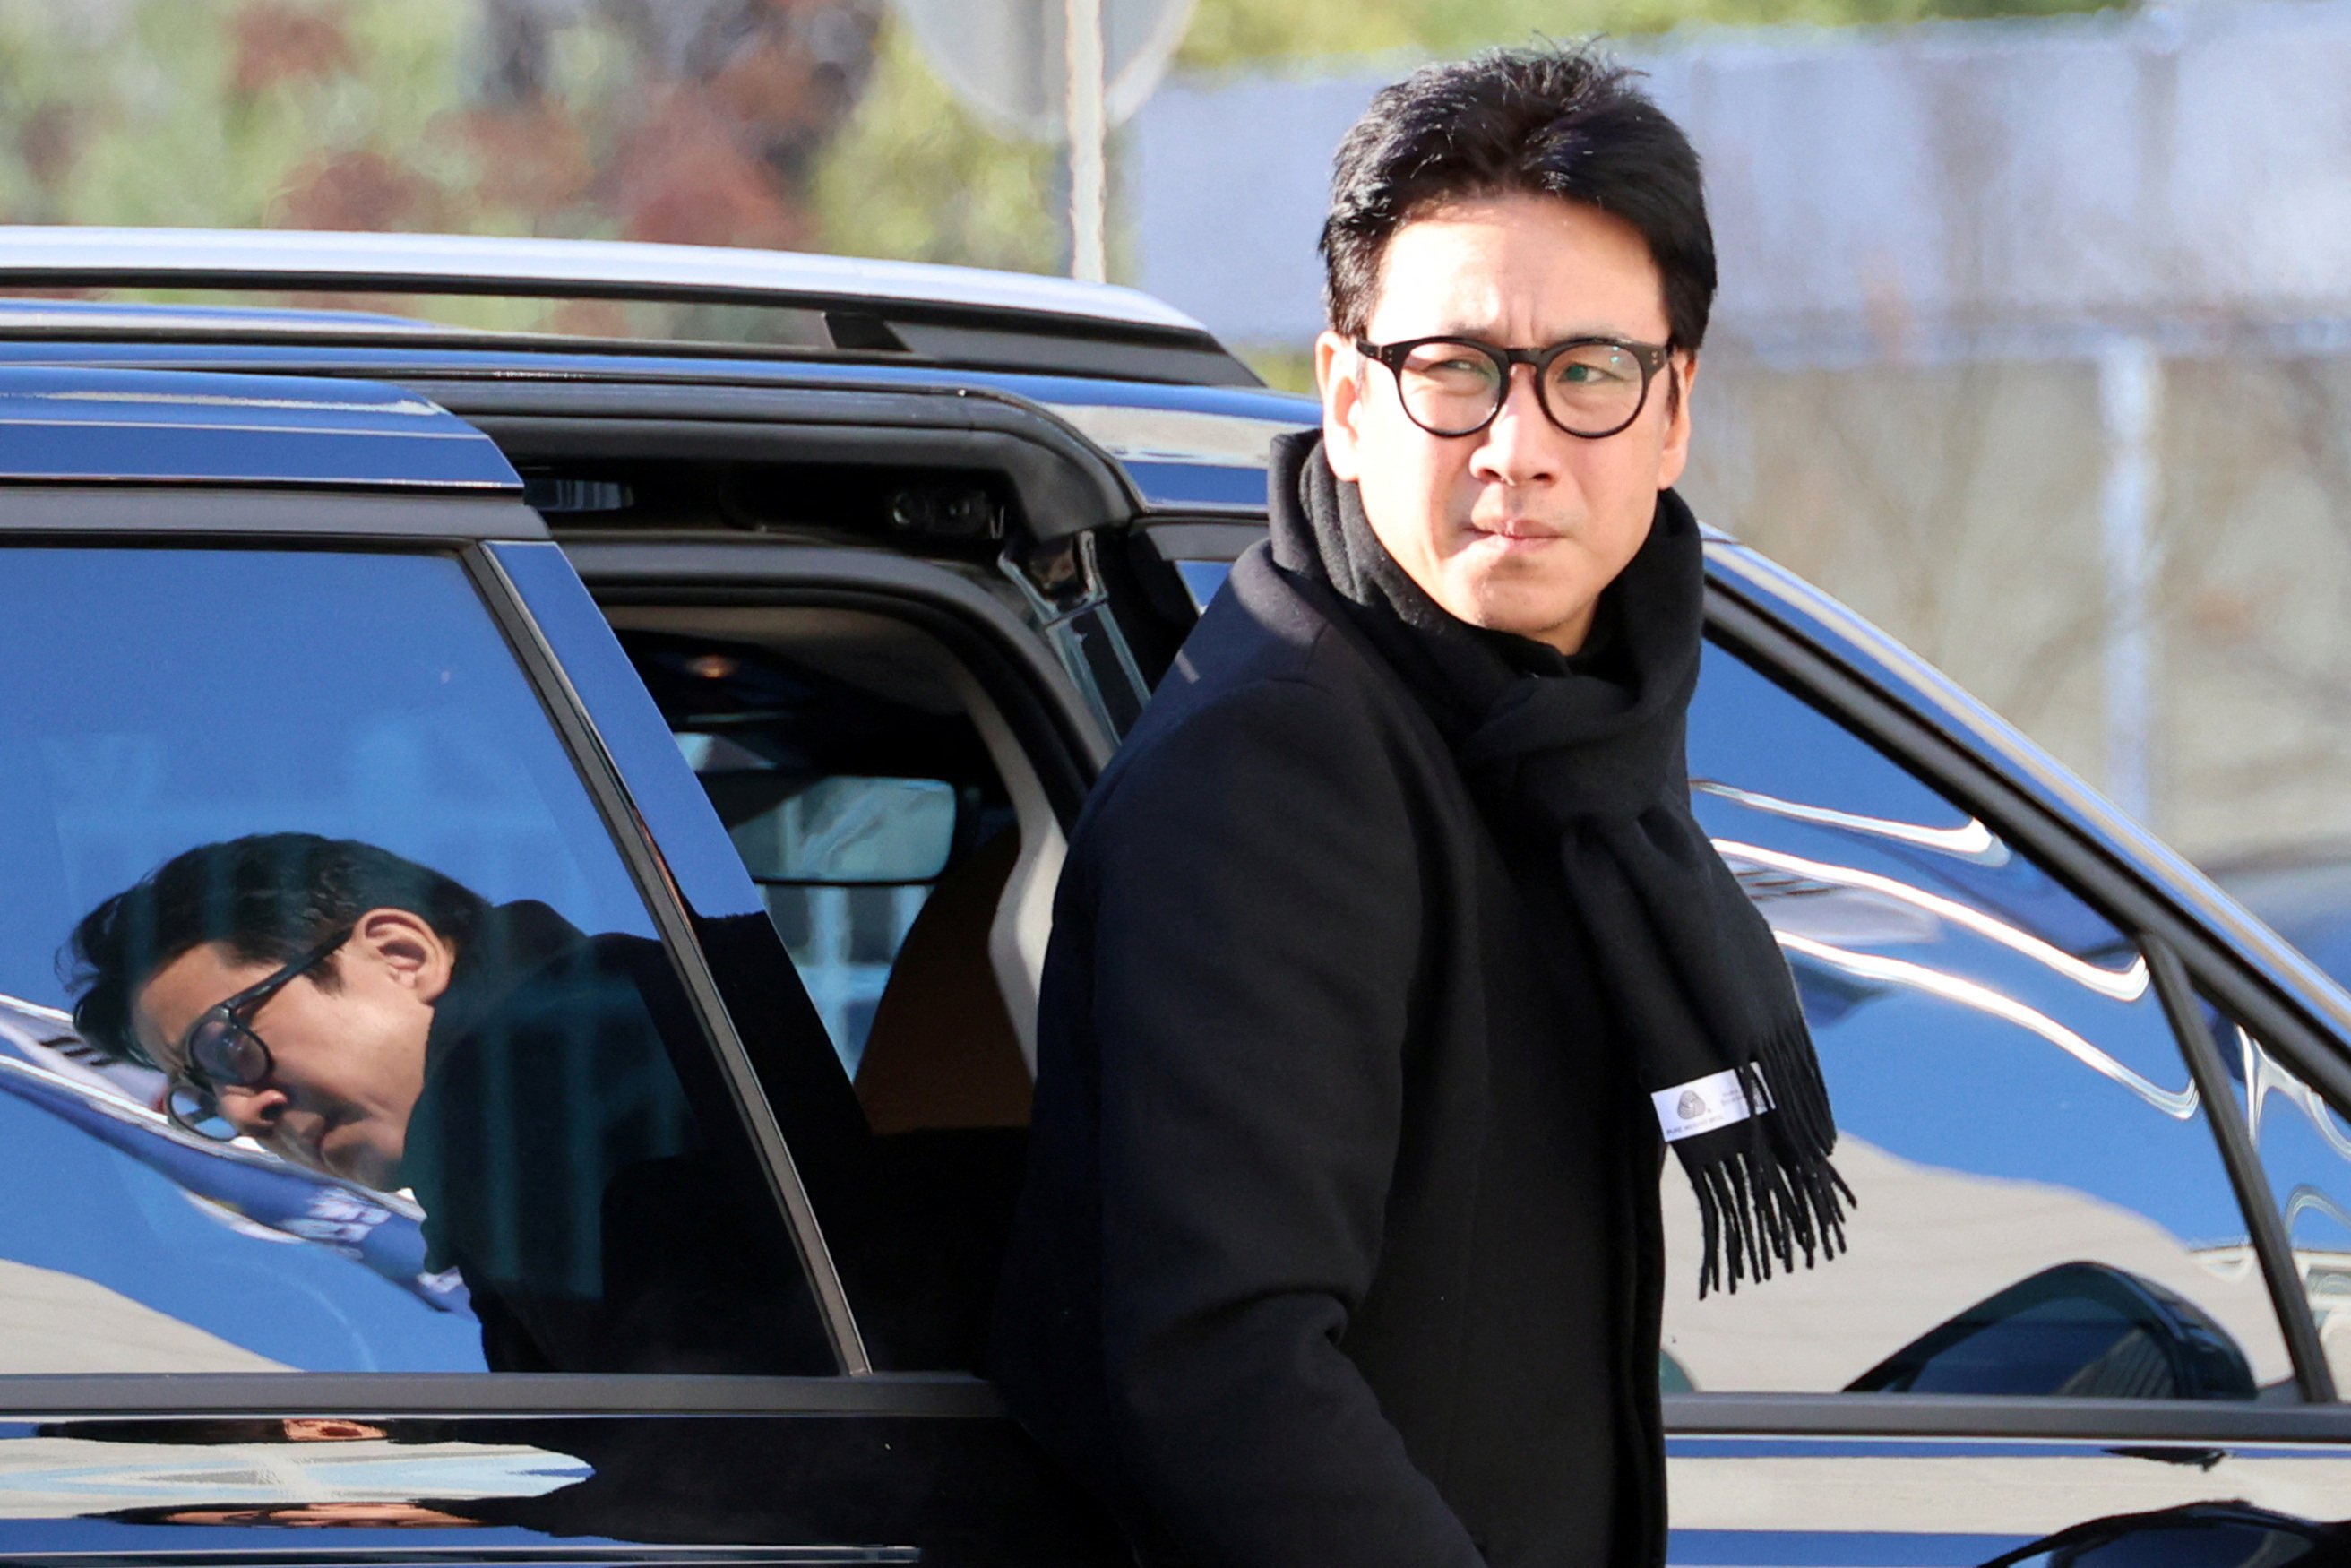 South Korean actor Lee Sun-kyun arrives at a police station in Incheon on December 23. Photo: Yonhap via Reuters